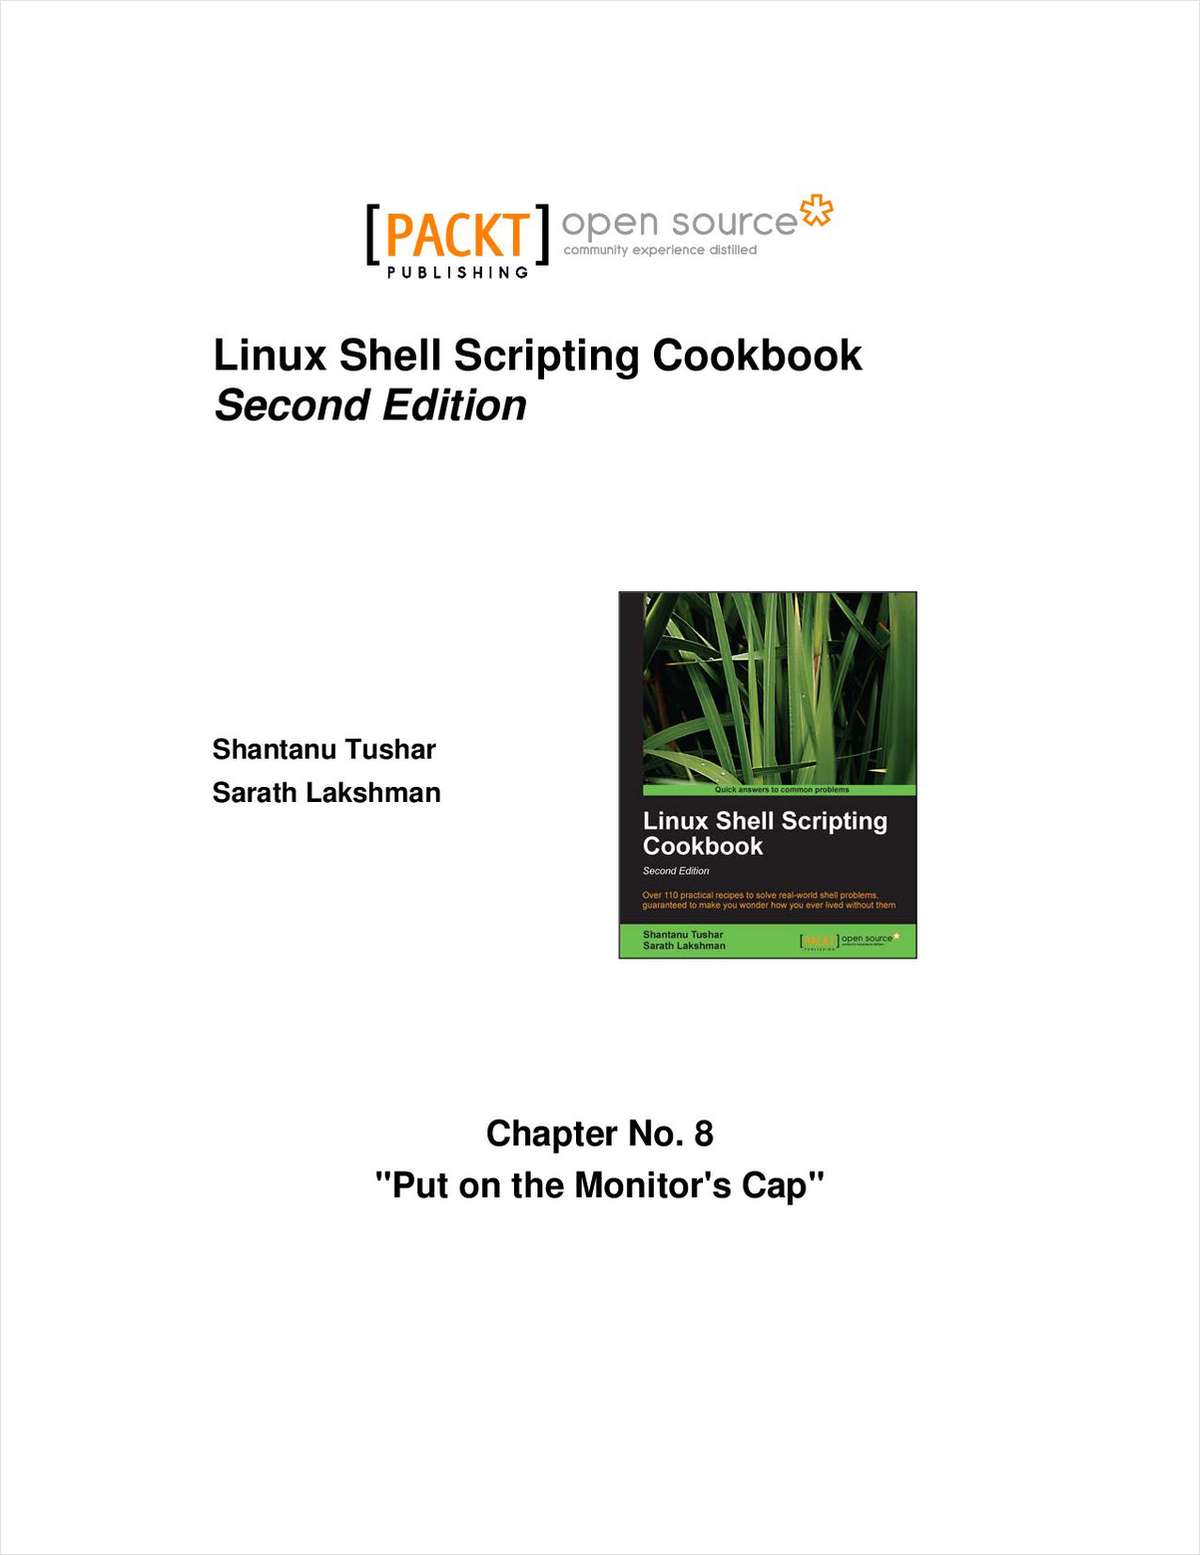 Linux Shell Scripting Cookbook, Second Edition--Free 40 Page Excerpt